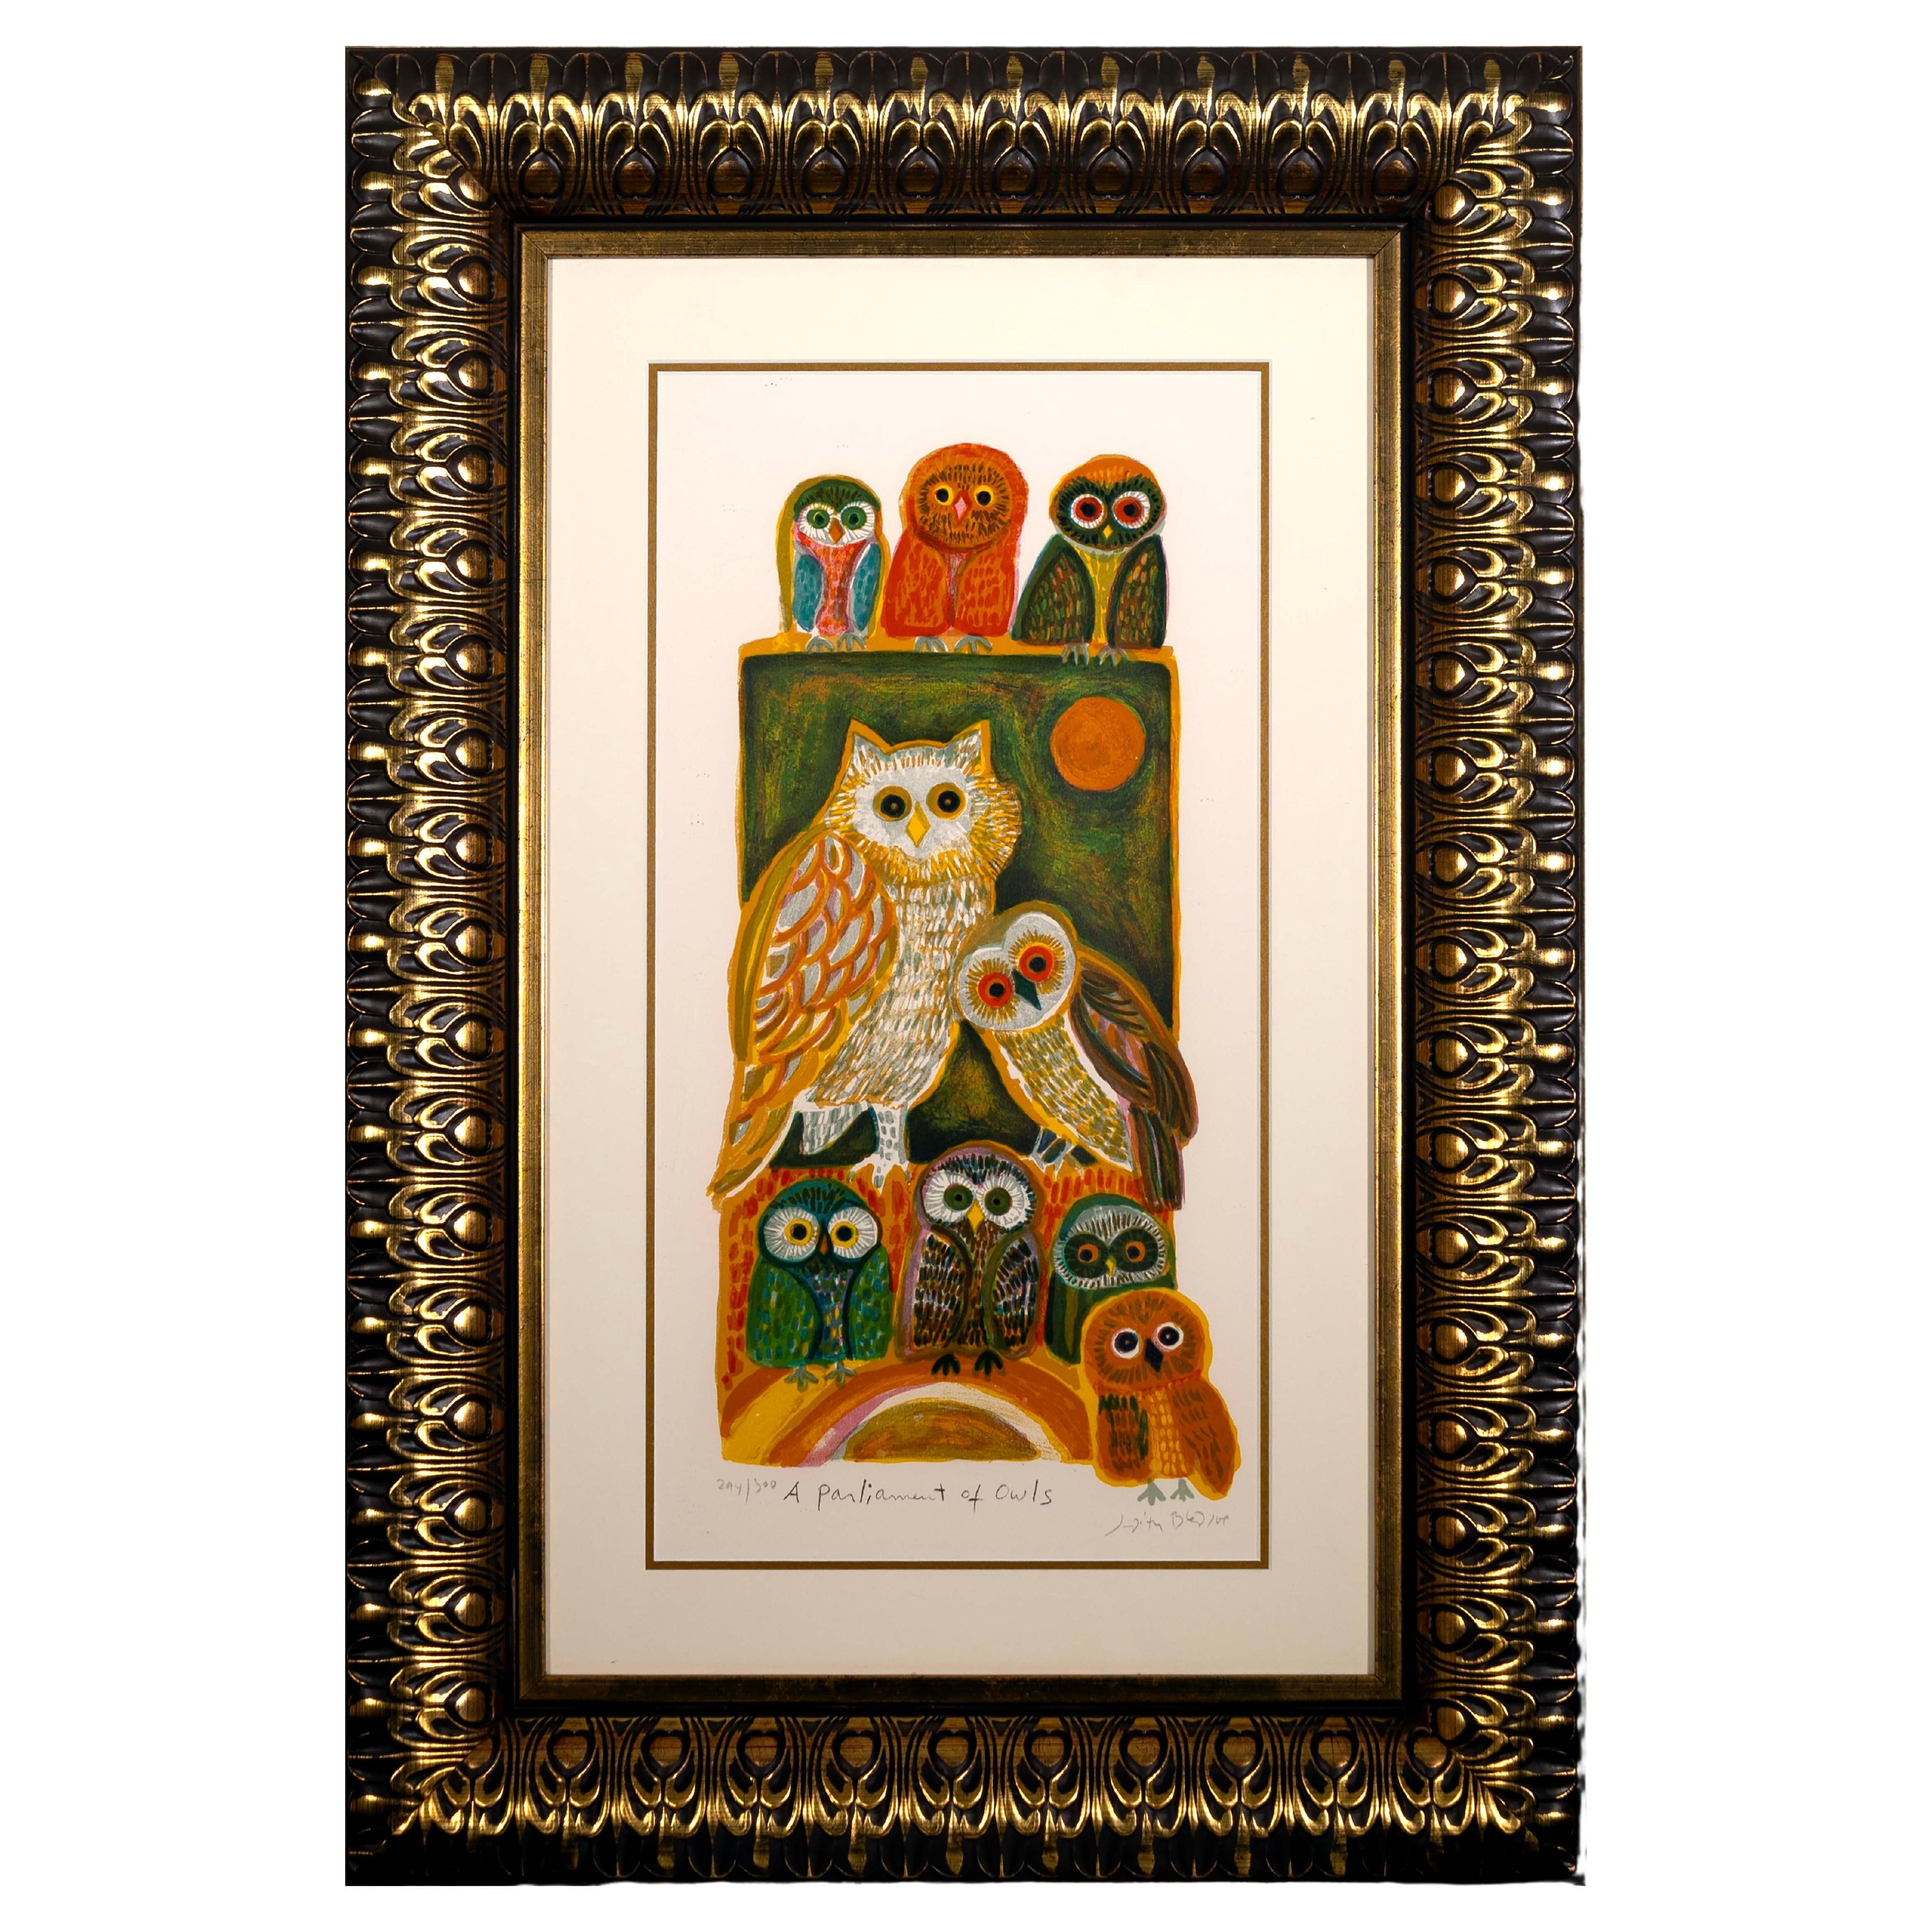 Judith Bledsoe A Parliament of Owls Signed Modern Lithograph 294/300 Framed For Sale